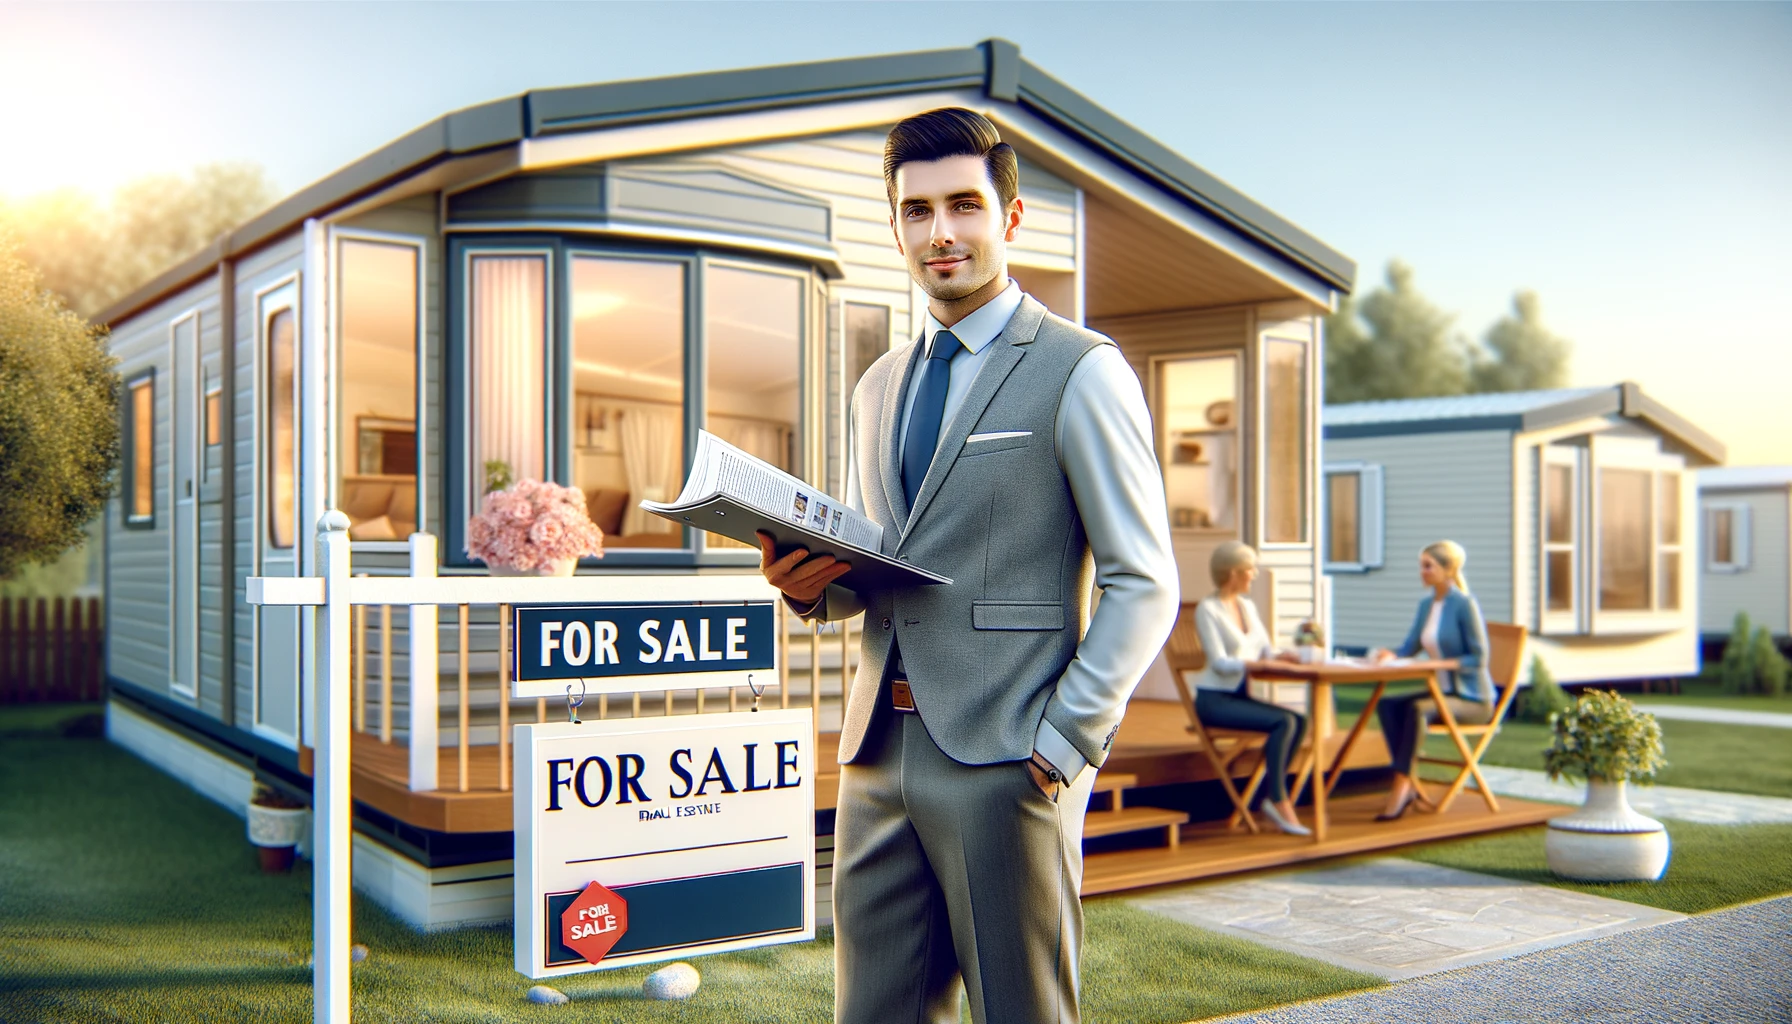 Can Real Estate Agents Sell Mobile Homes?